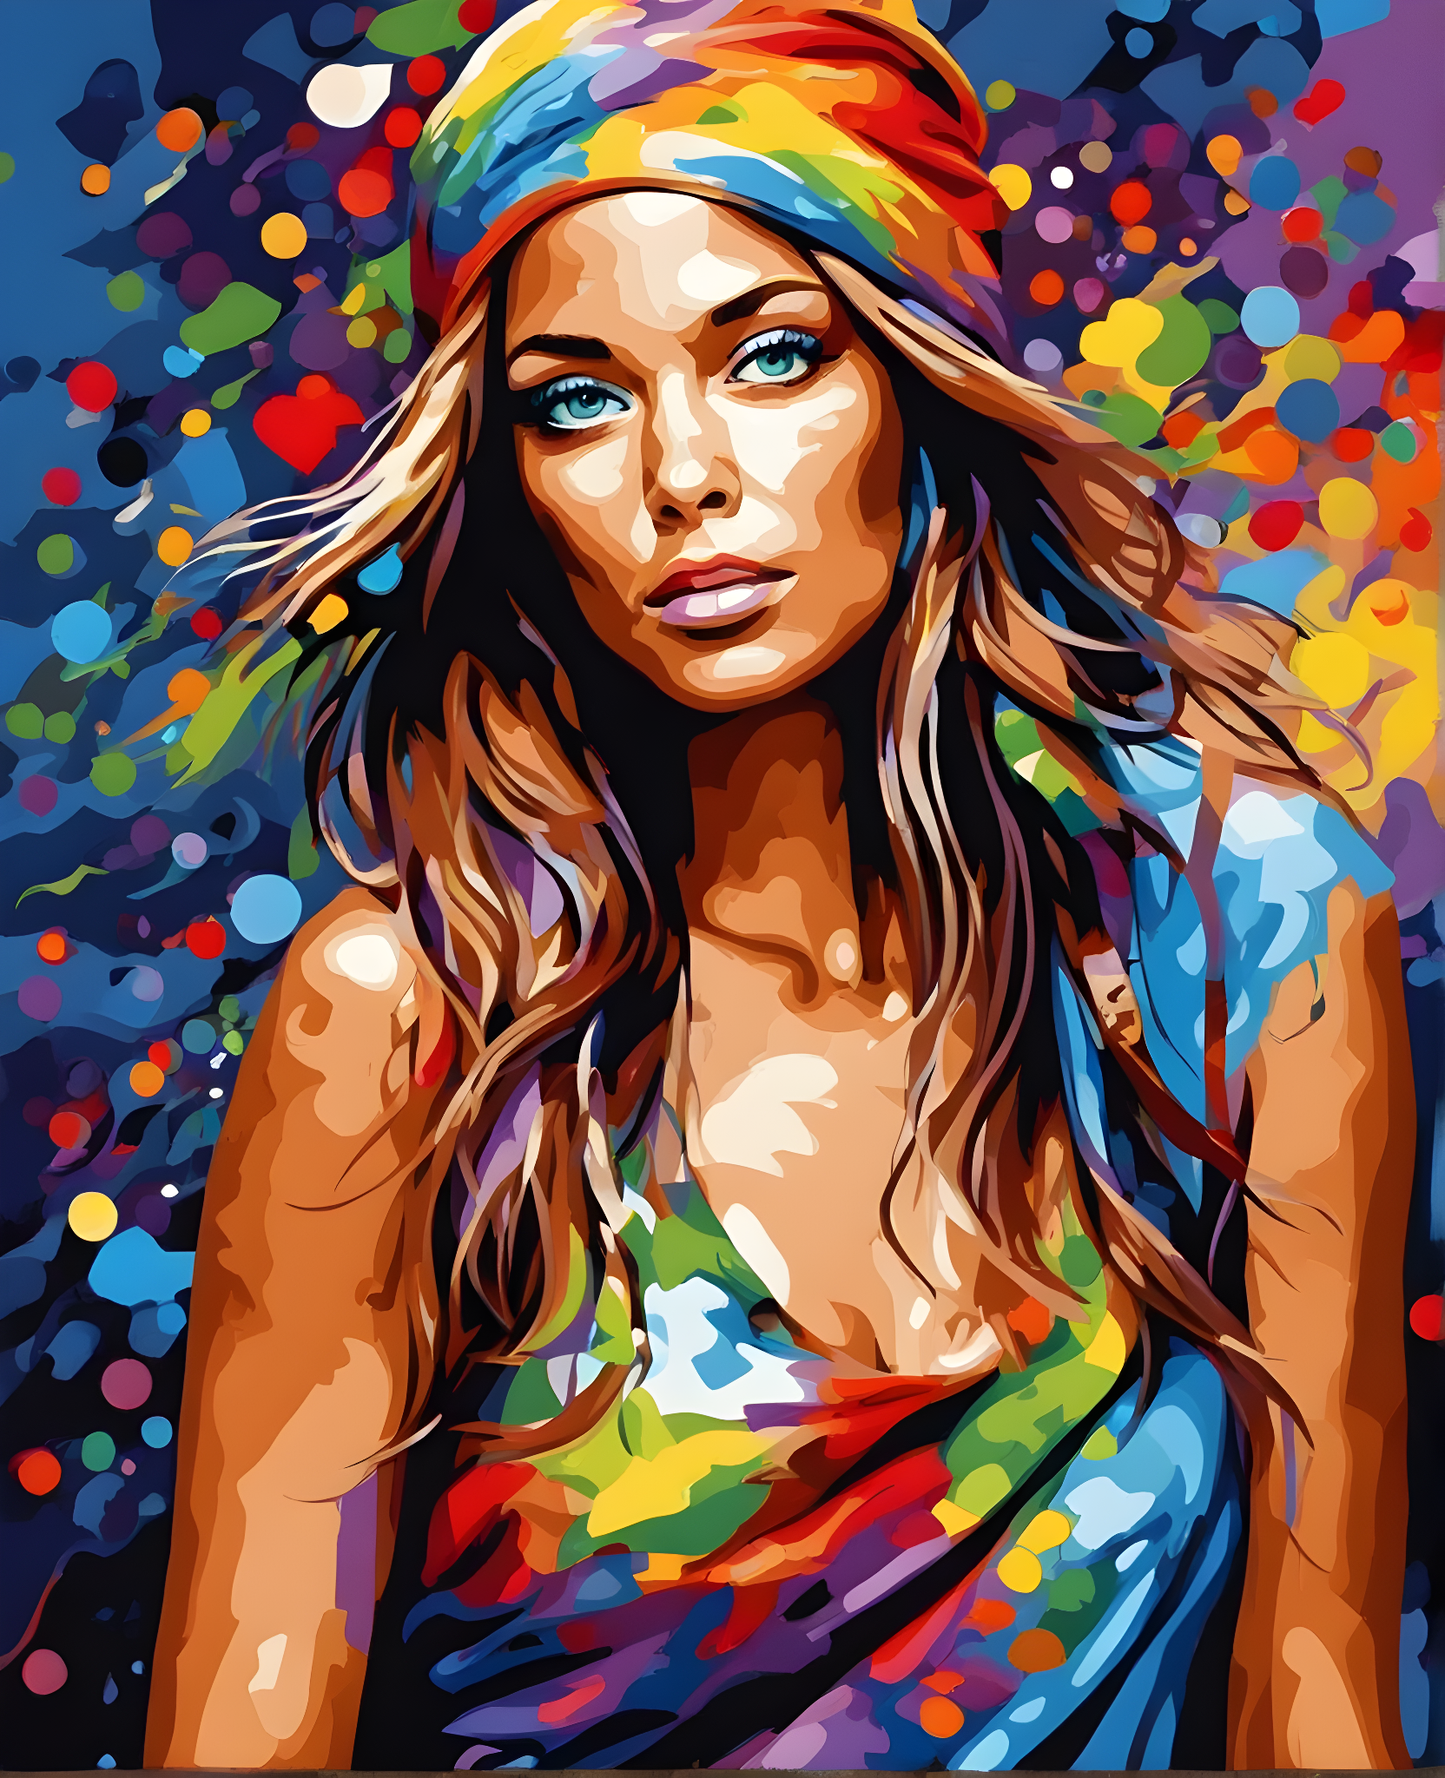 A Colorful Woman (3) - Van-Go Paint-By-Number Kit